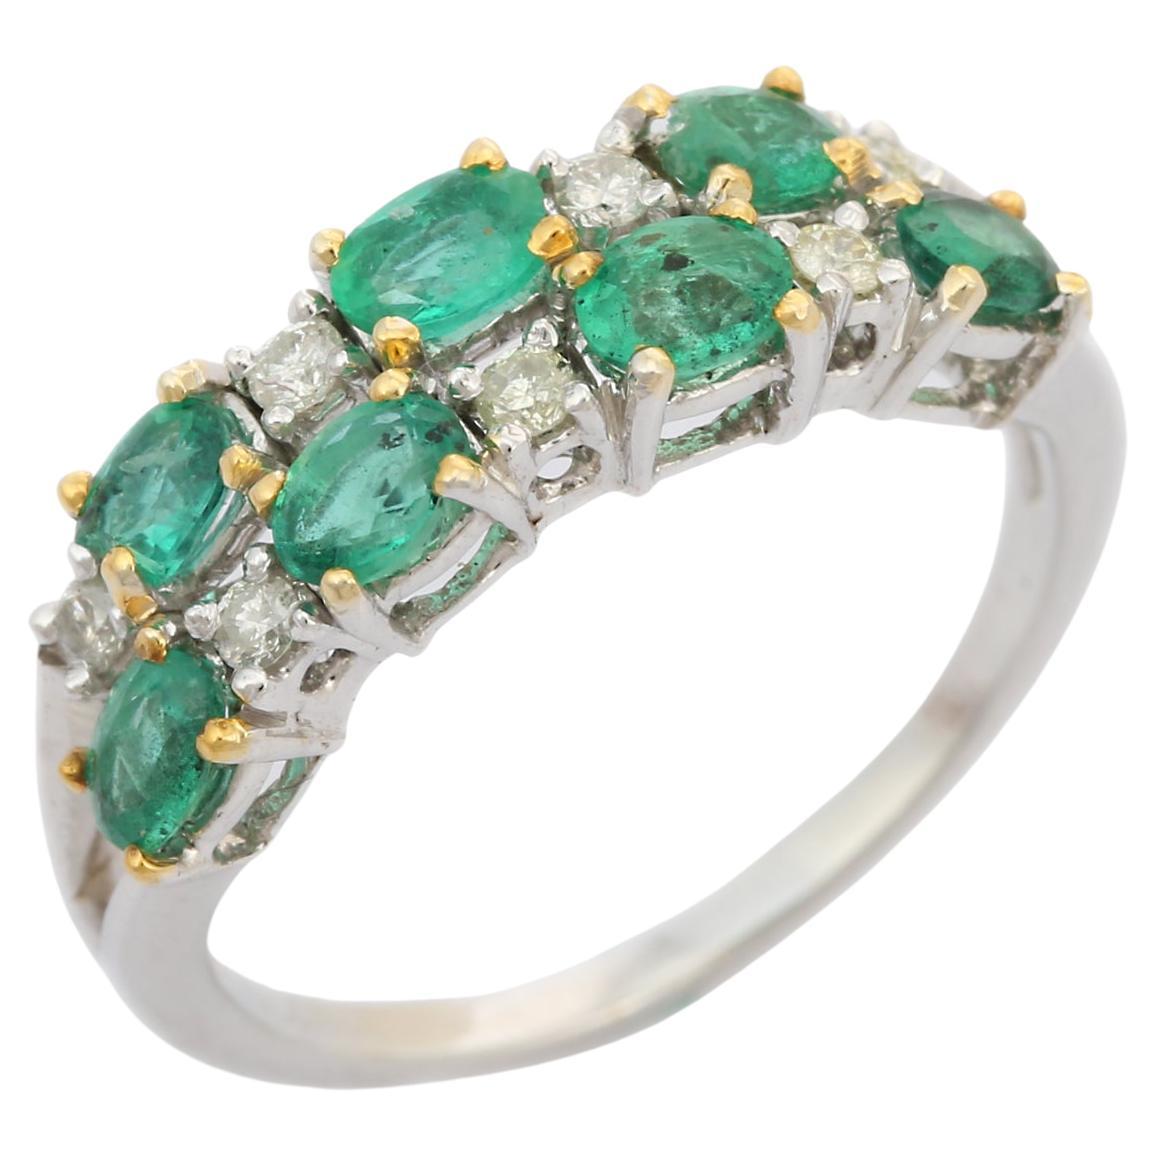 Brilliant Diamond and Emerald Wedding Band Ring Studded in 18k White Gold